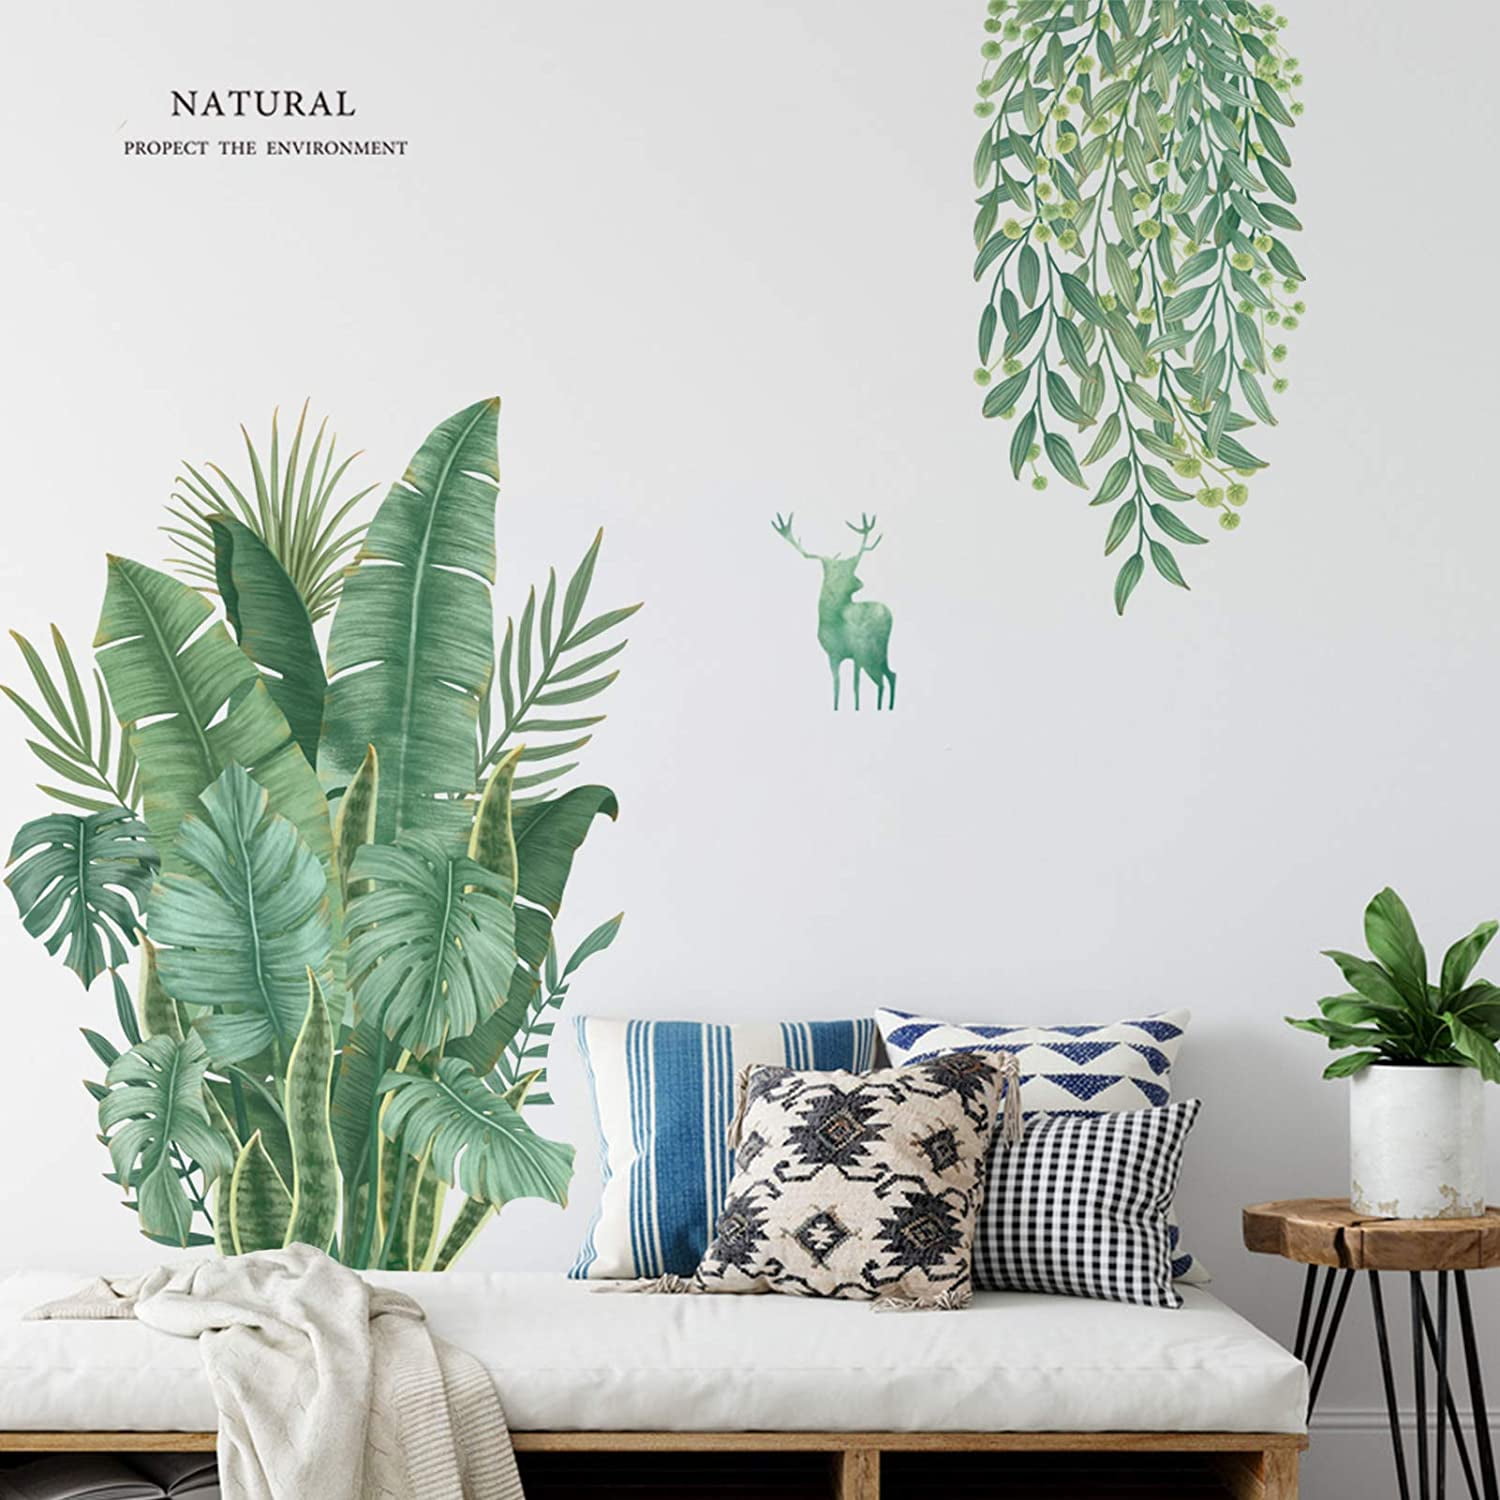 Tropical Leaves Green Plant Wall Stickers Vinyl Decal Living Room Art Mural 